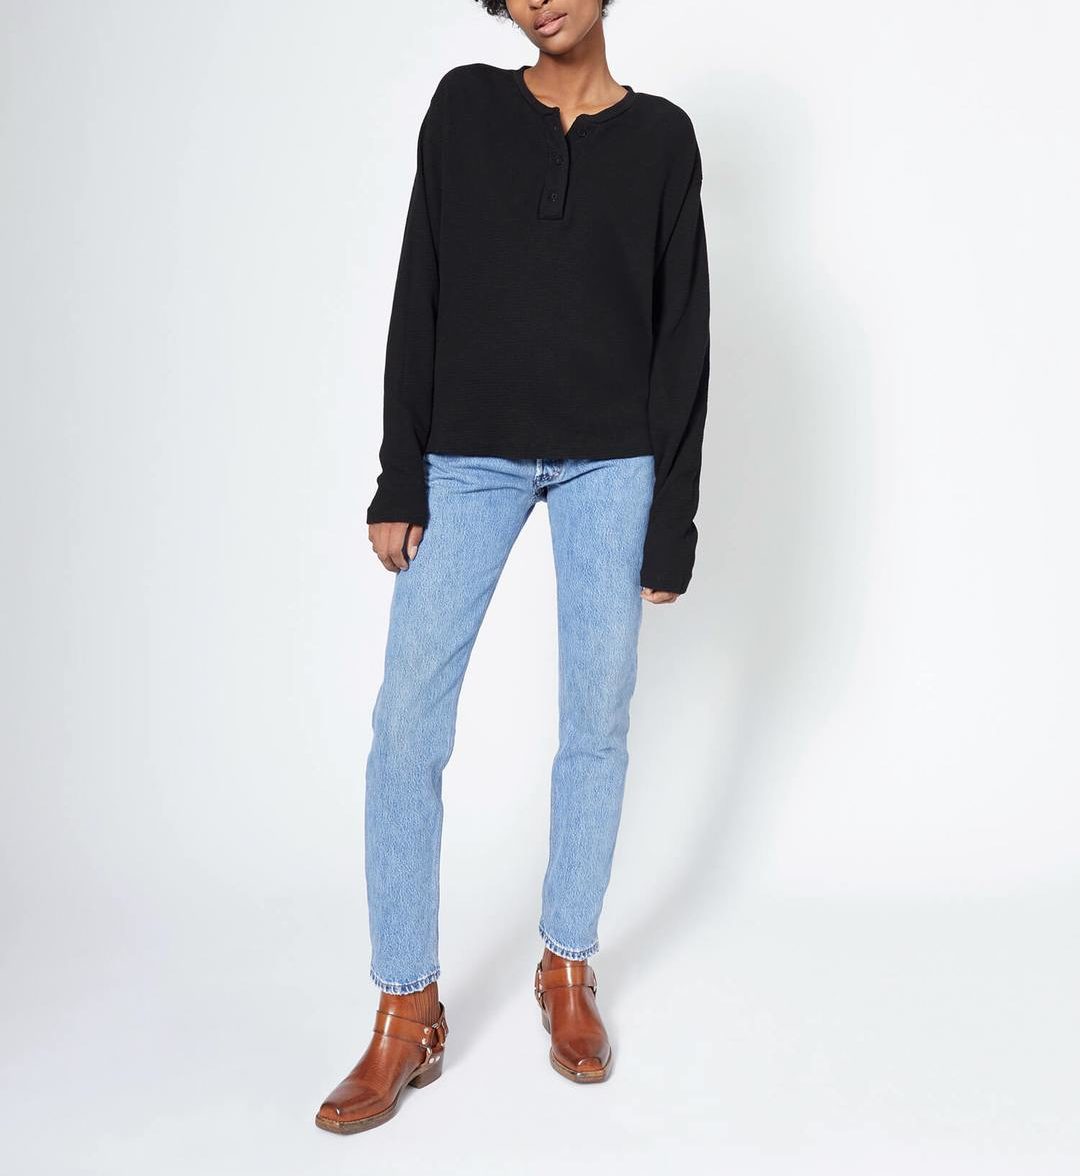 RE/DONE HENLEY THERMAL LONG SLEEVE TEE - AshleyCole Boutique